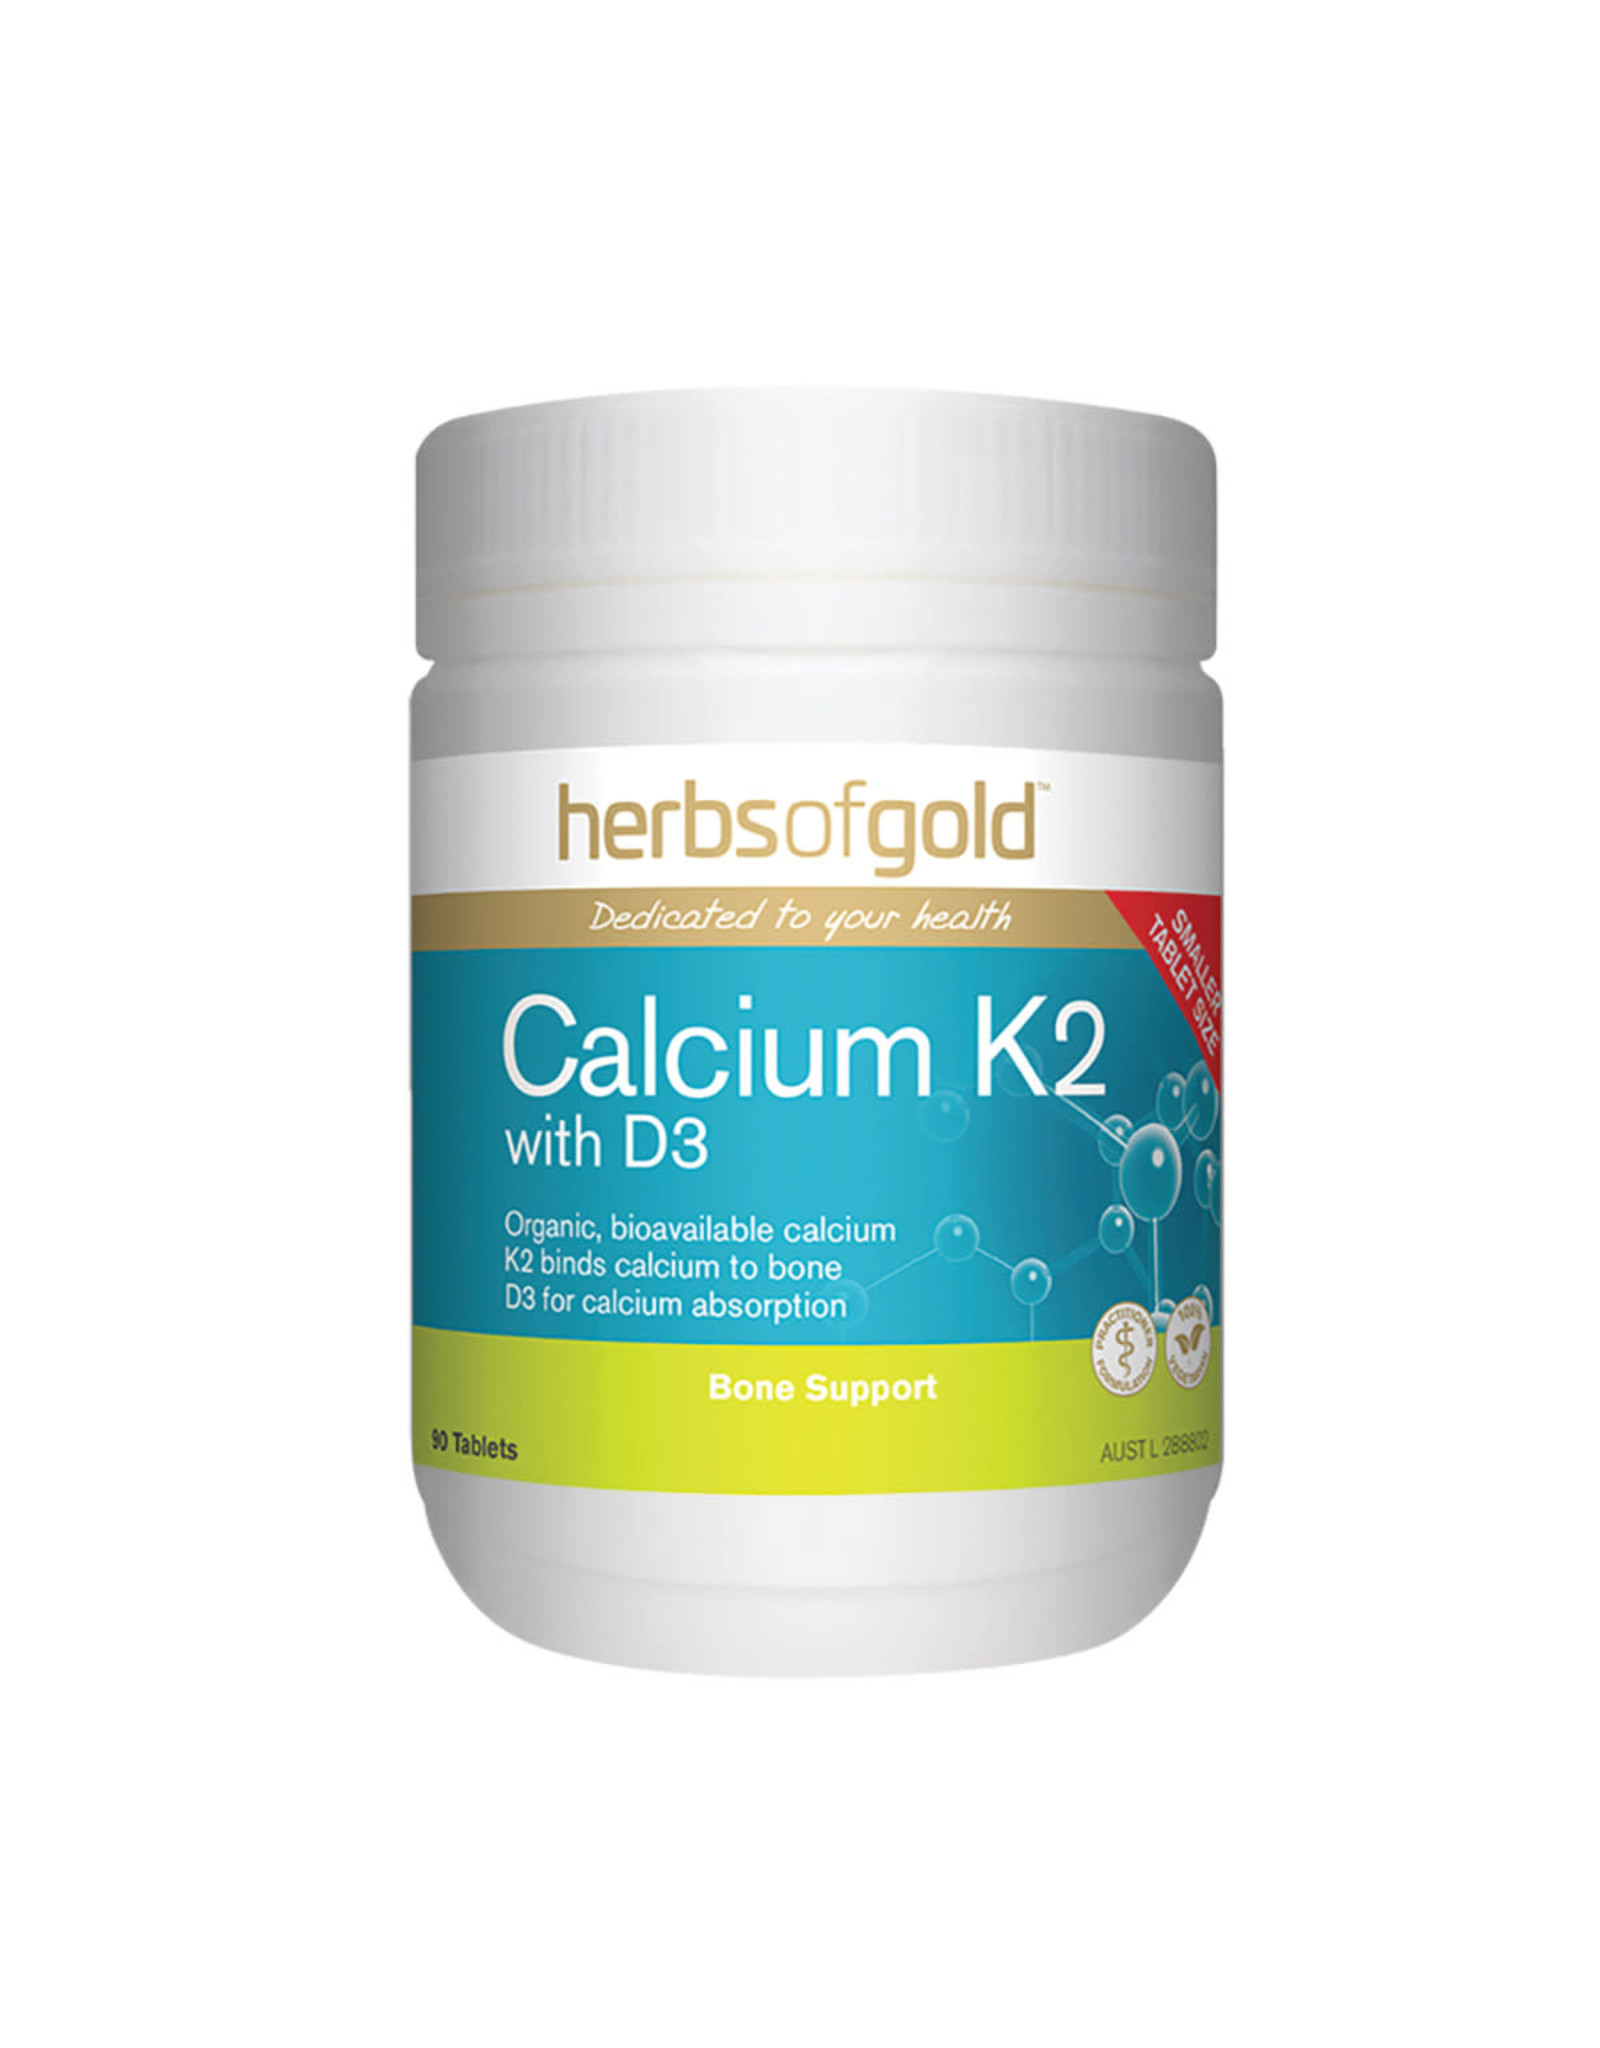 Herbs of Gold Calcium K2 with D3 90t